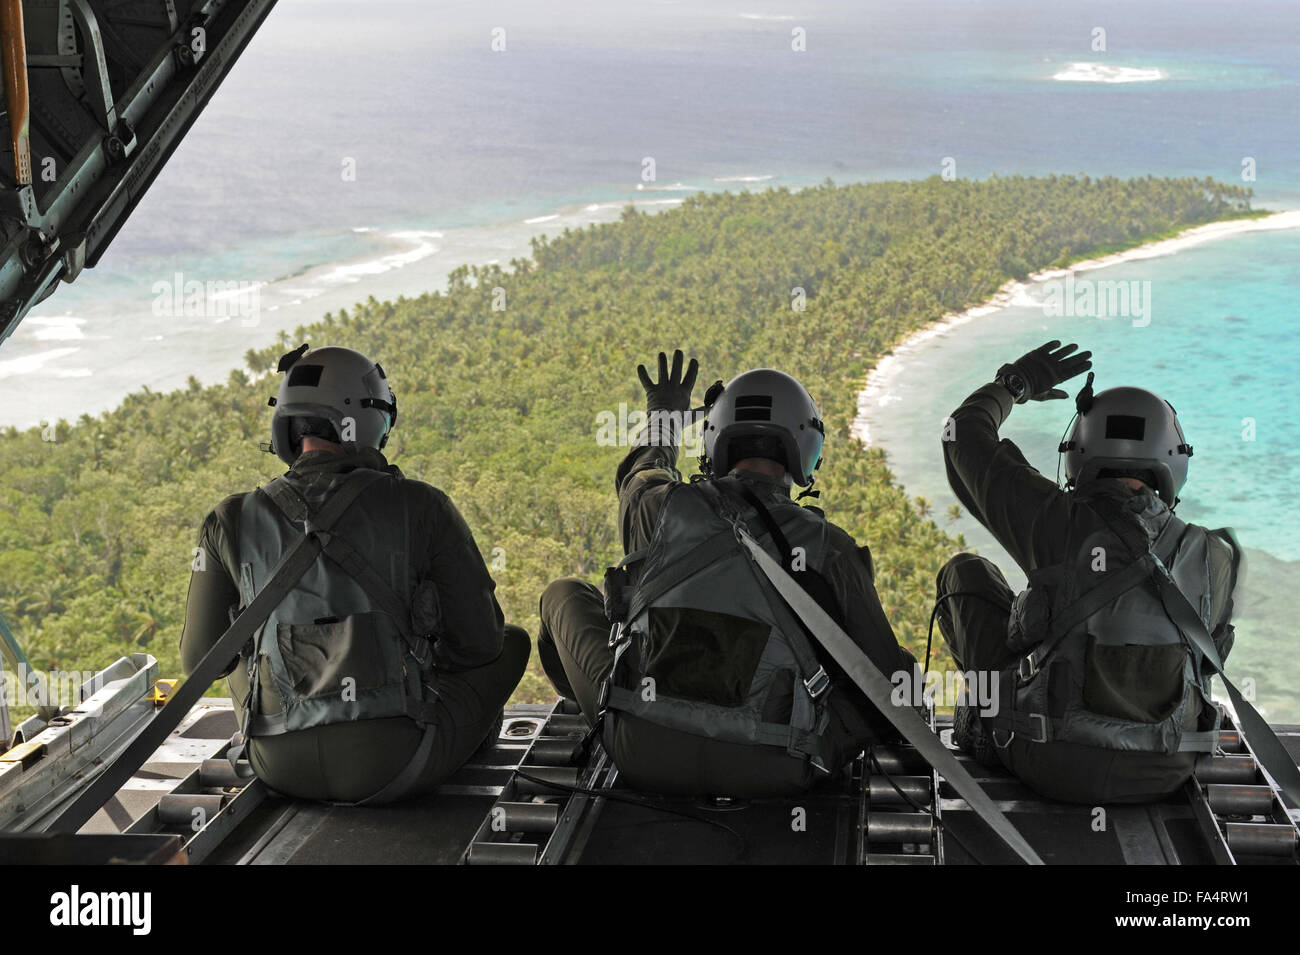 U.S. Air Force airmen wave from the back of their C-130 Hercules aircraft after air dropping gifts during Operation Christmas Drop December 11, 2015 in Micronesia. Operation Christmas Drop is the longest running Department of Defense humanitarian operation covering 56 remote Pacific islands. Stock Photo